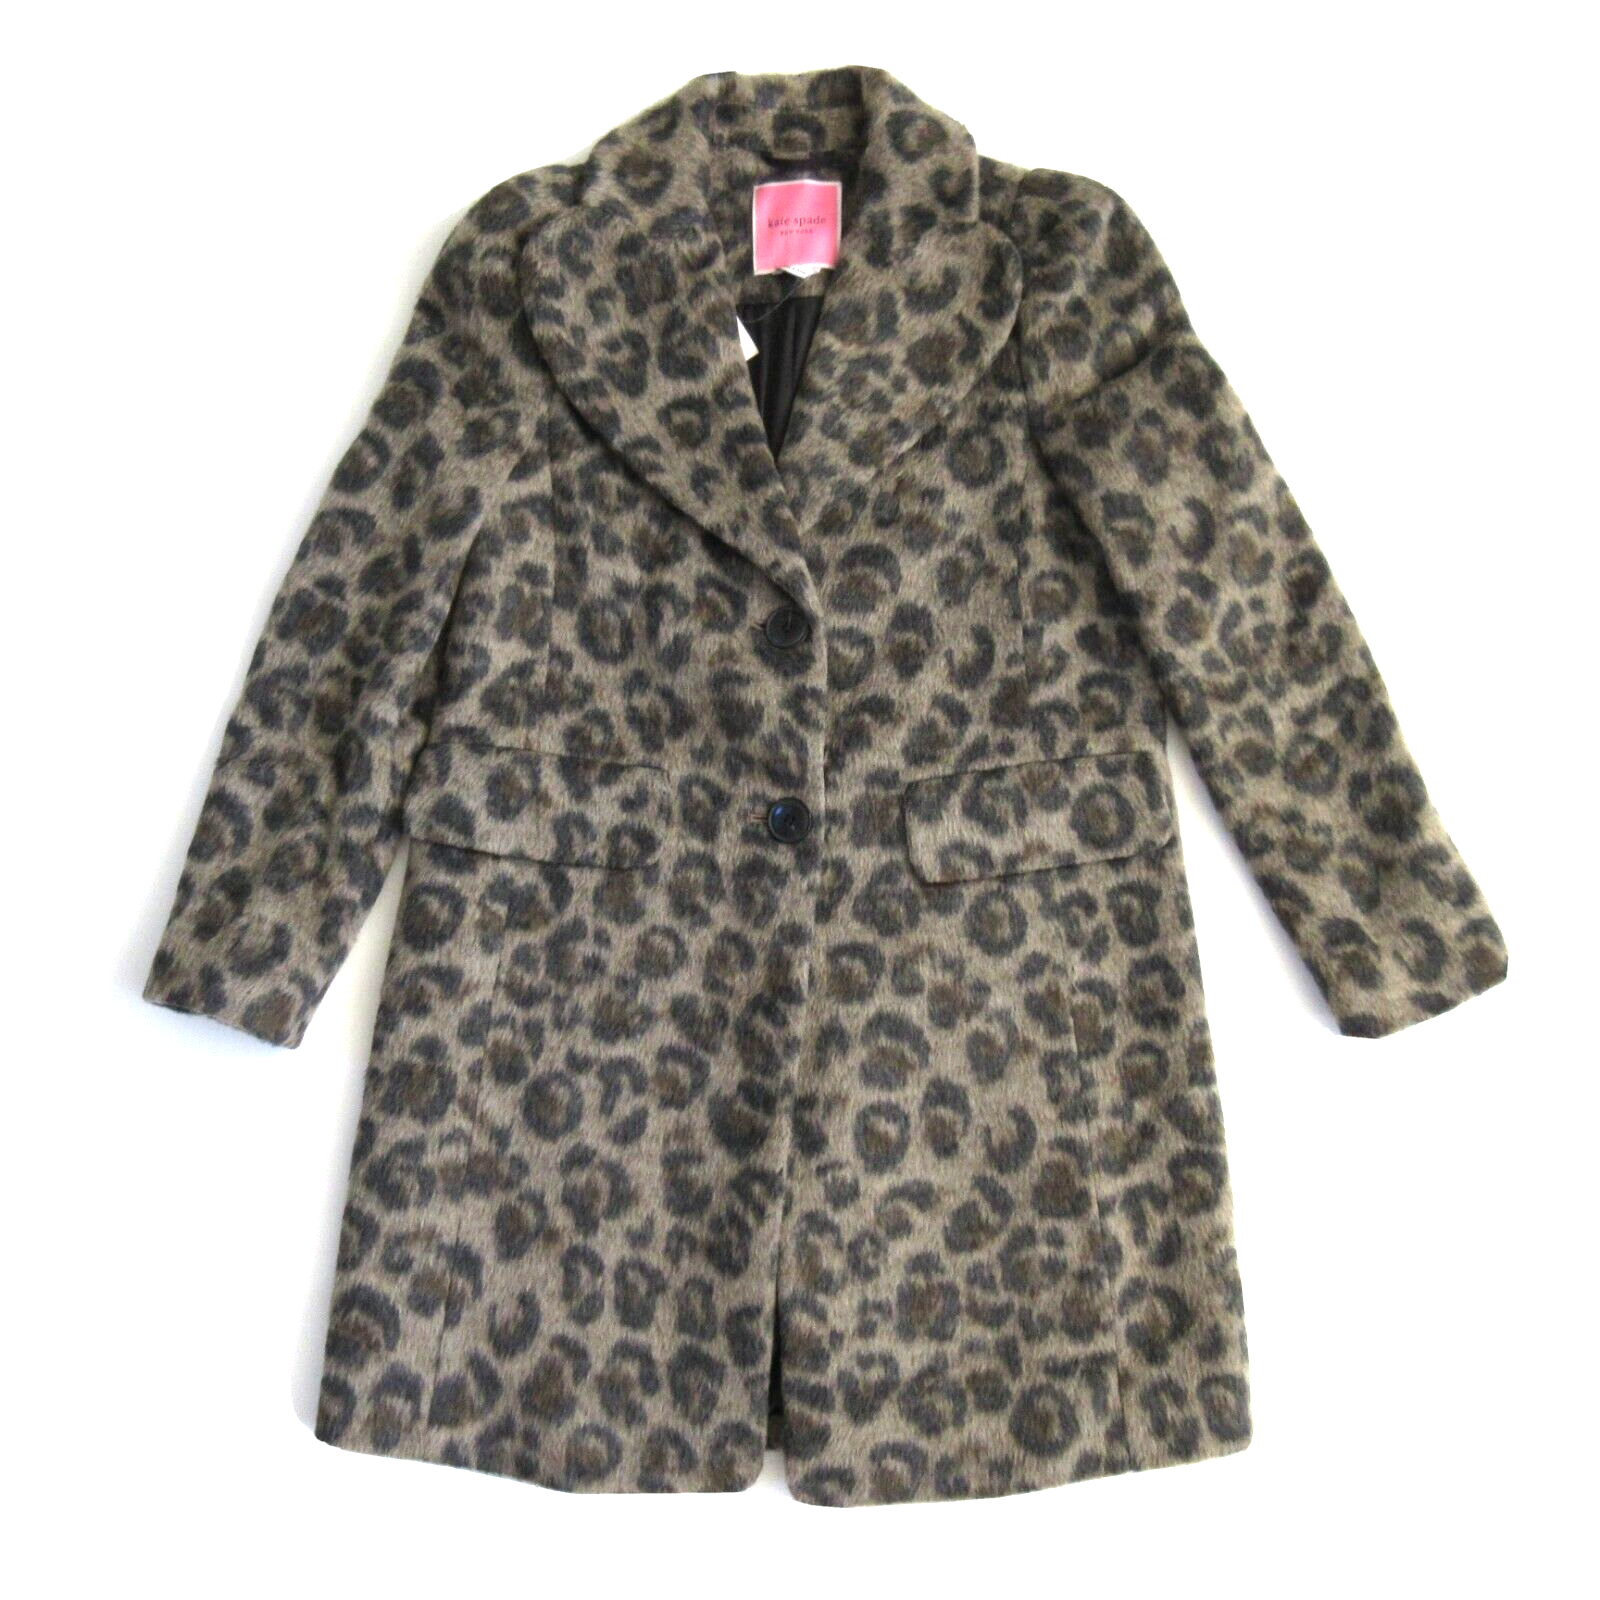 Primary image for NWT Kate Spade Brushed Leopard Coat in Hazelnut Wool Blend Topcoat 0 $728